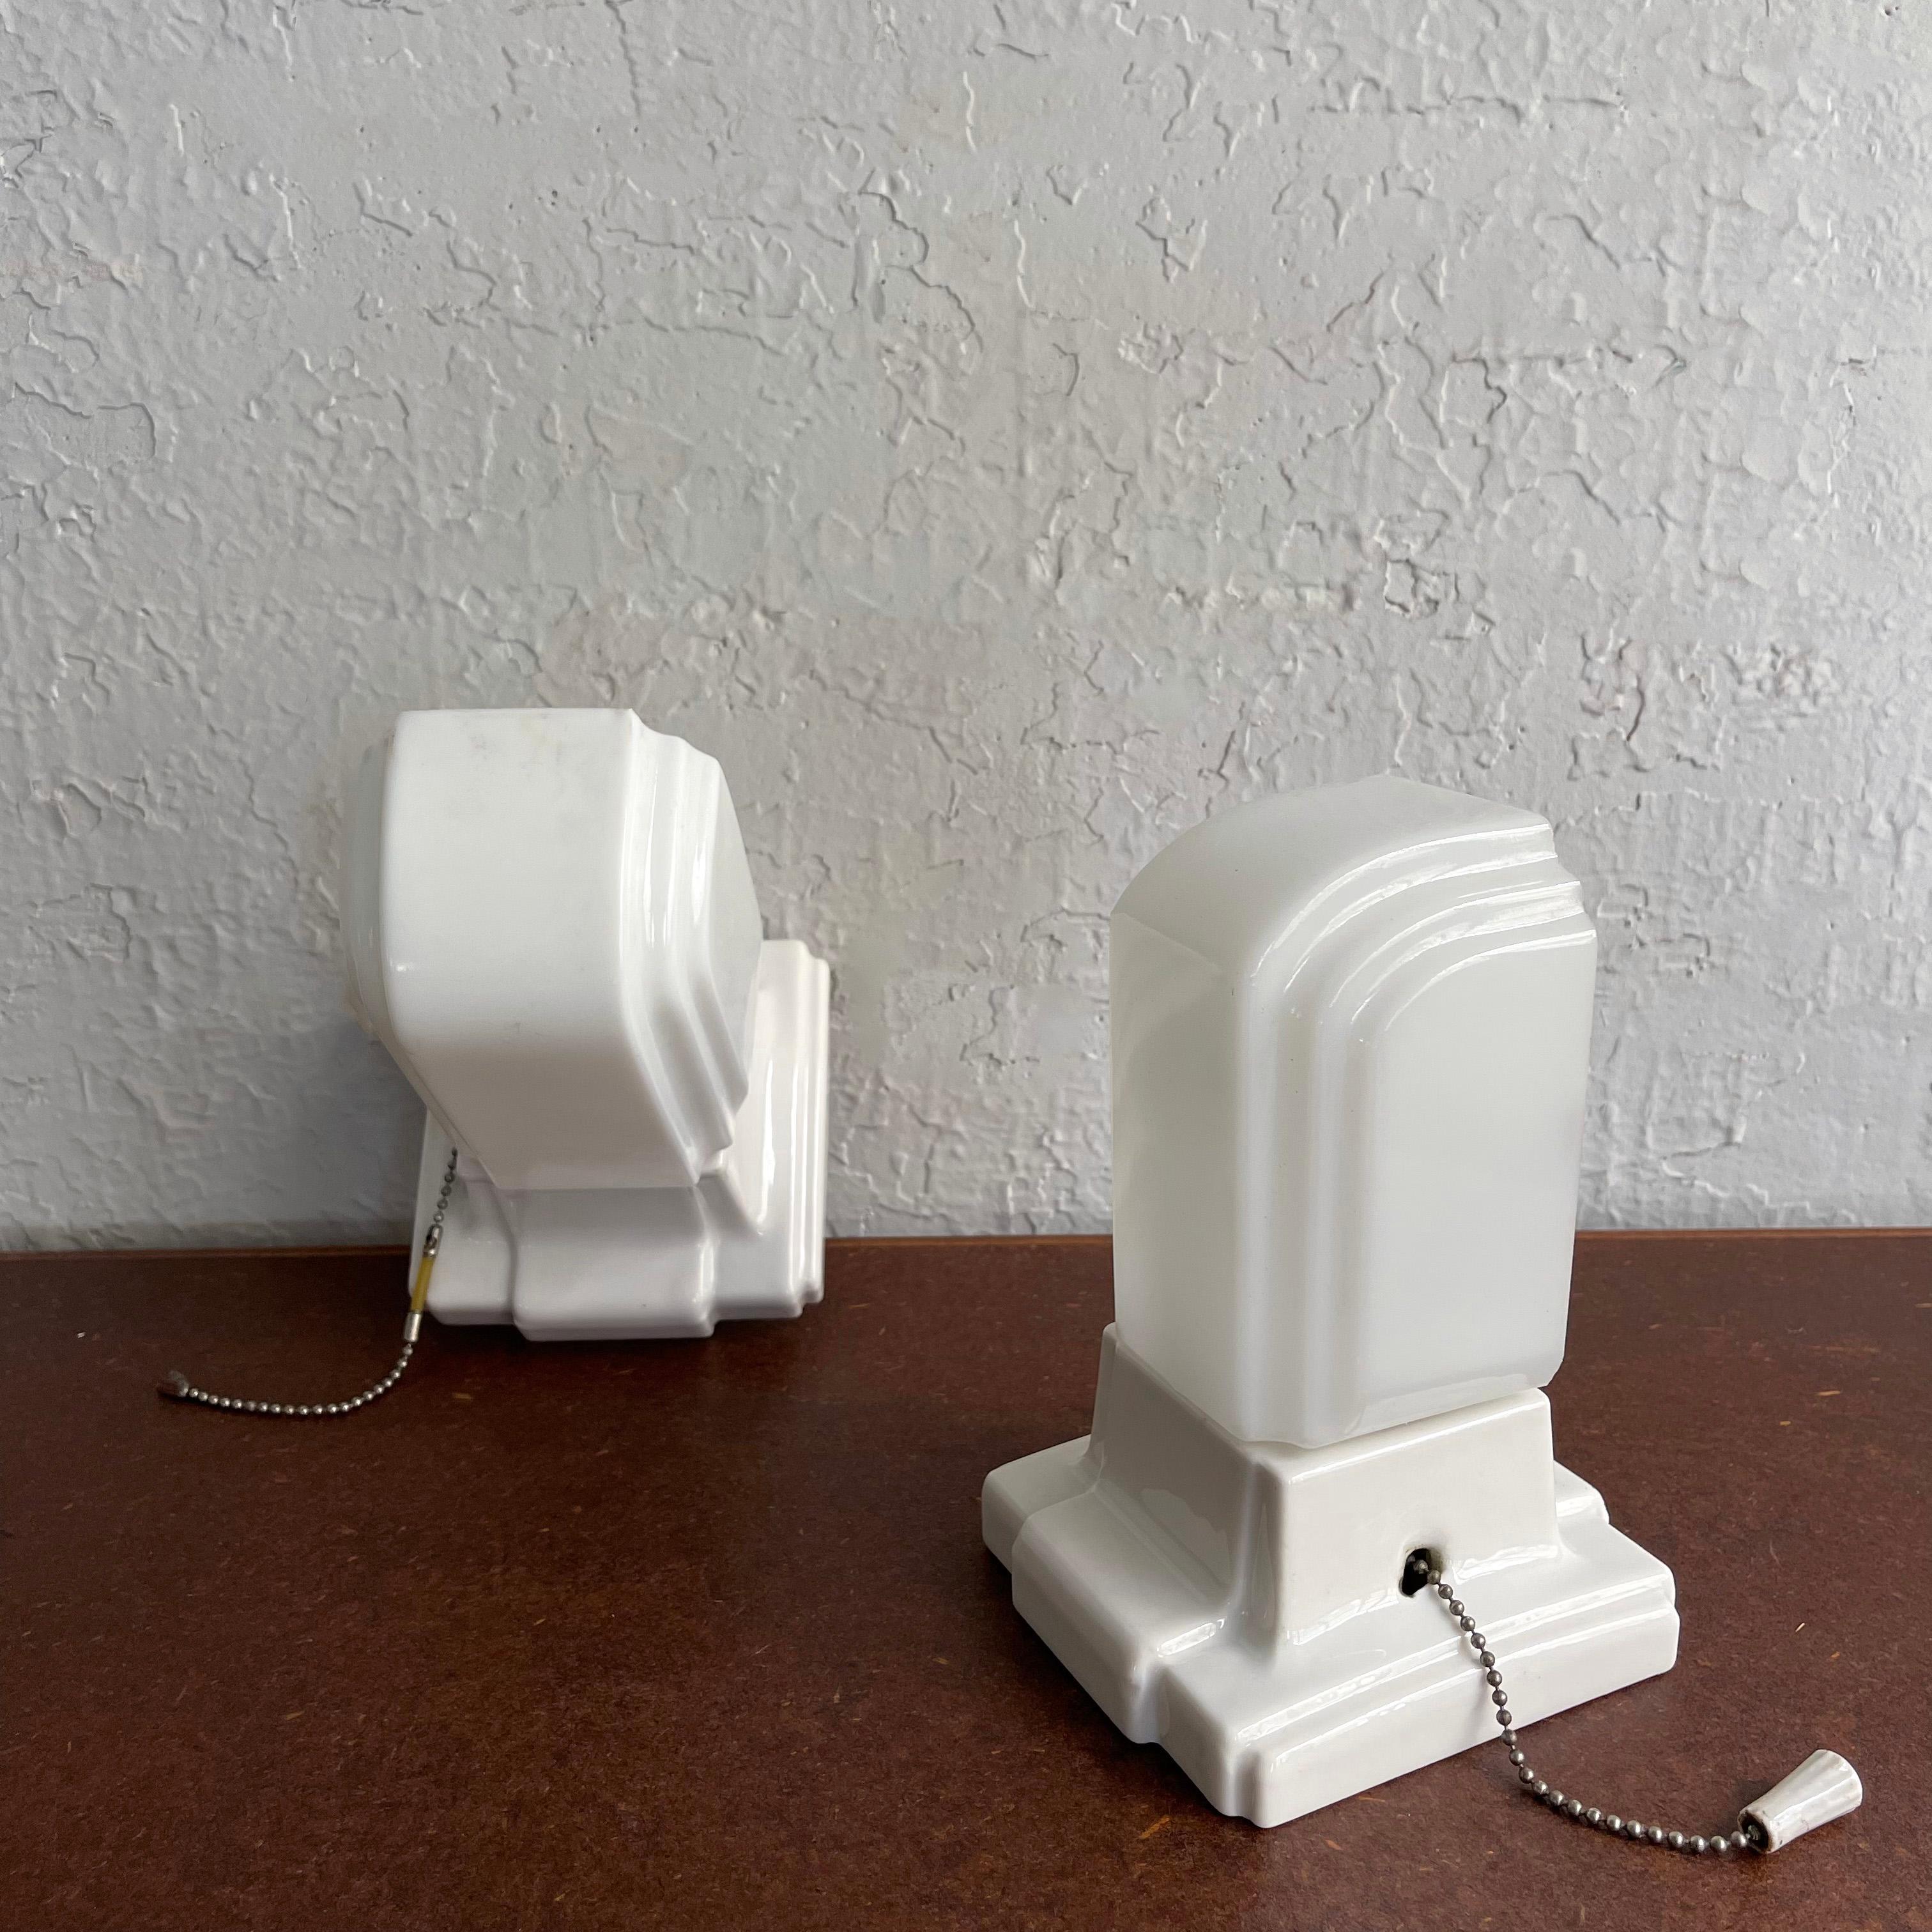 20th Century Art Deco Milk Glass and Porcelain Wall Sconce Lights